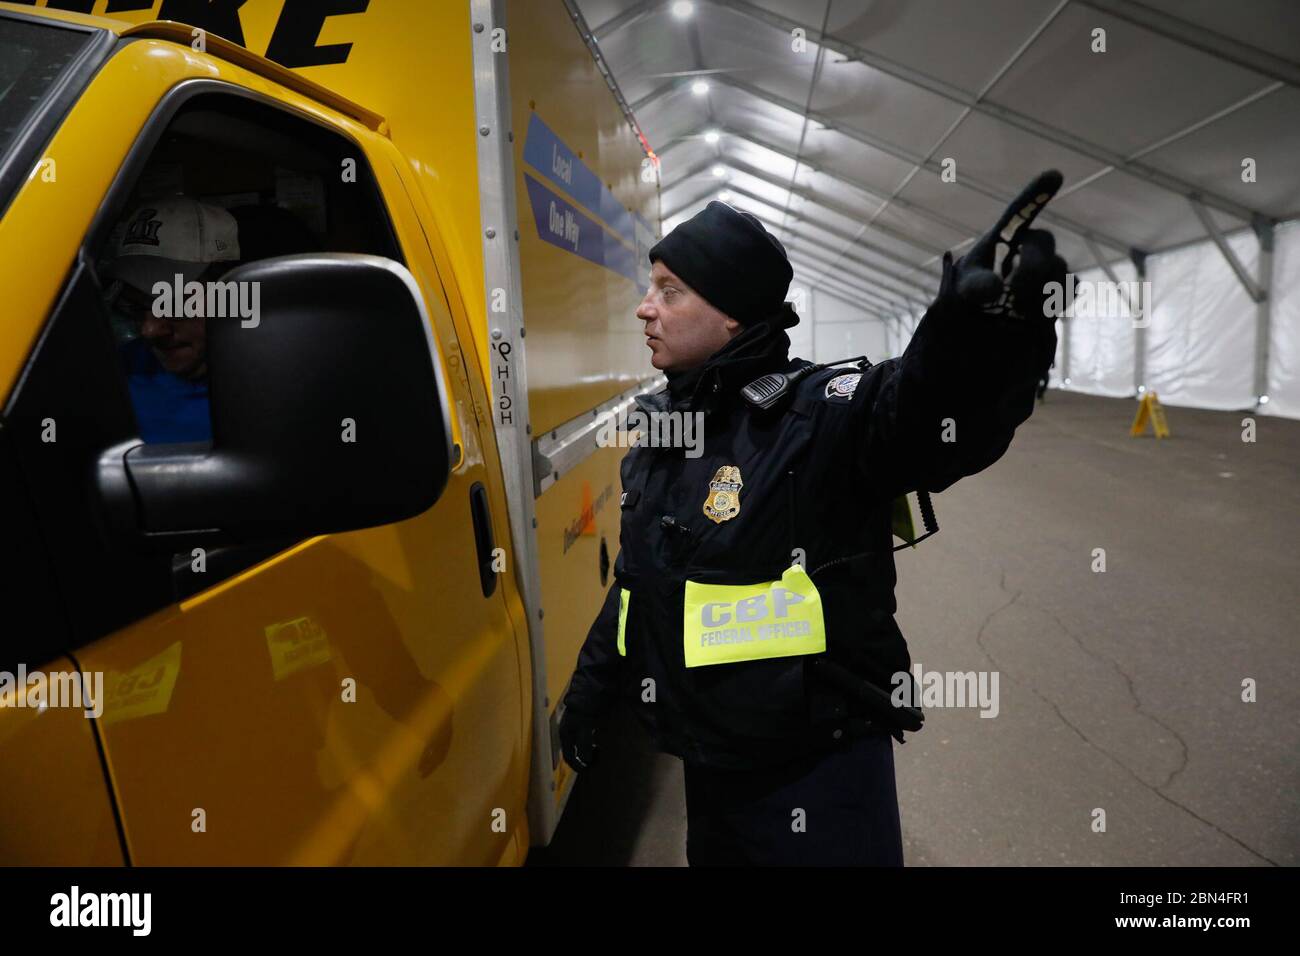 A U.S. Customs and Border Protection, Office of Field Operations, officer gestures as he directs the driver of a truck where to stand shortly before X-raying the vehicle during non-intrusive inspections prior to Super Bowl LII in Minneapolis, Minn., Jan. 30, 2018. On Sunday, Feb. 4, the Philadelphia Eagles will face off against the New England Patriots for the NFL championship title. U.S. Customs and Border Protection Stock Photo